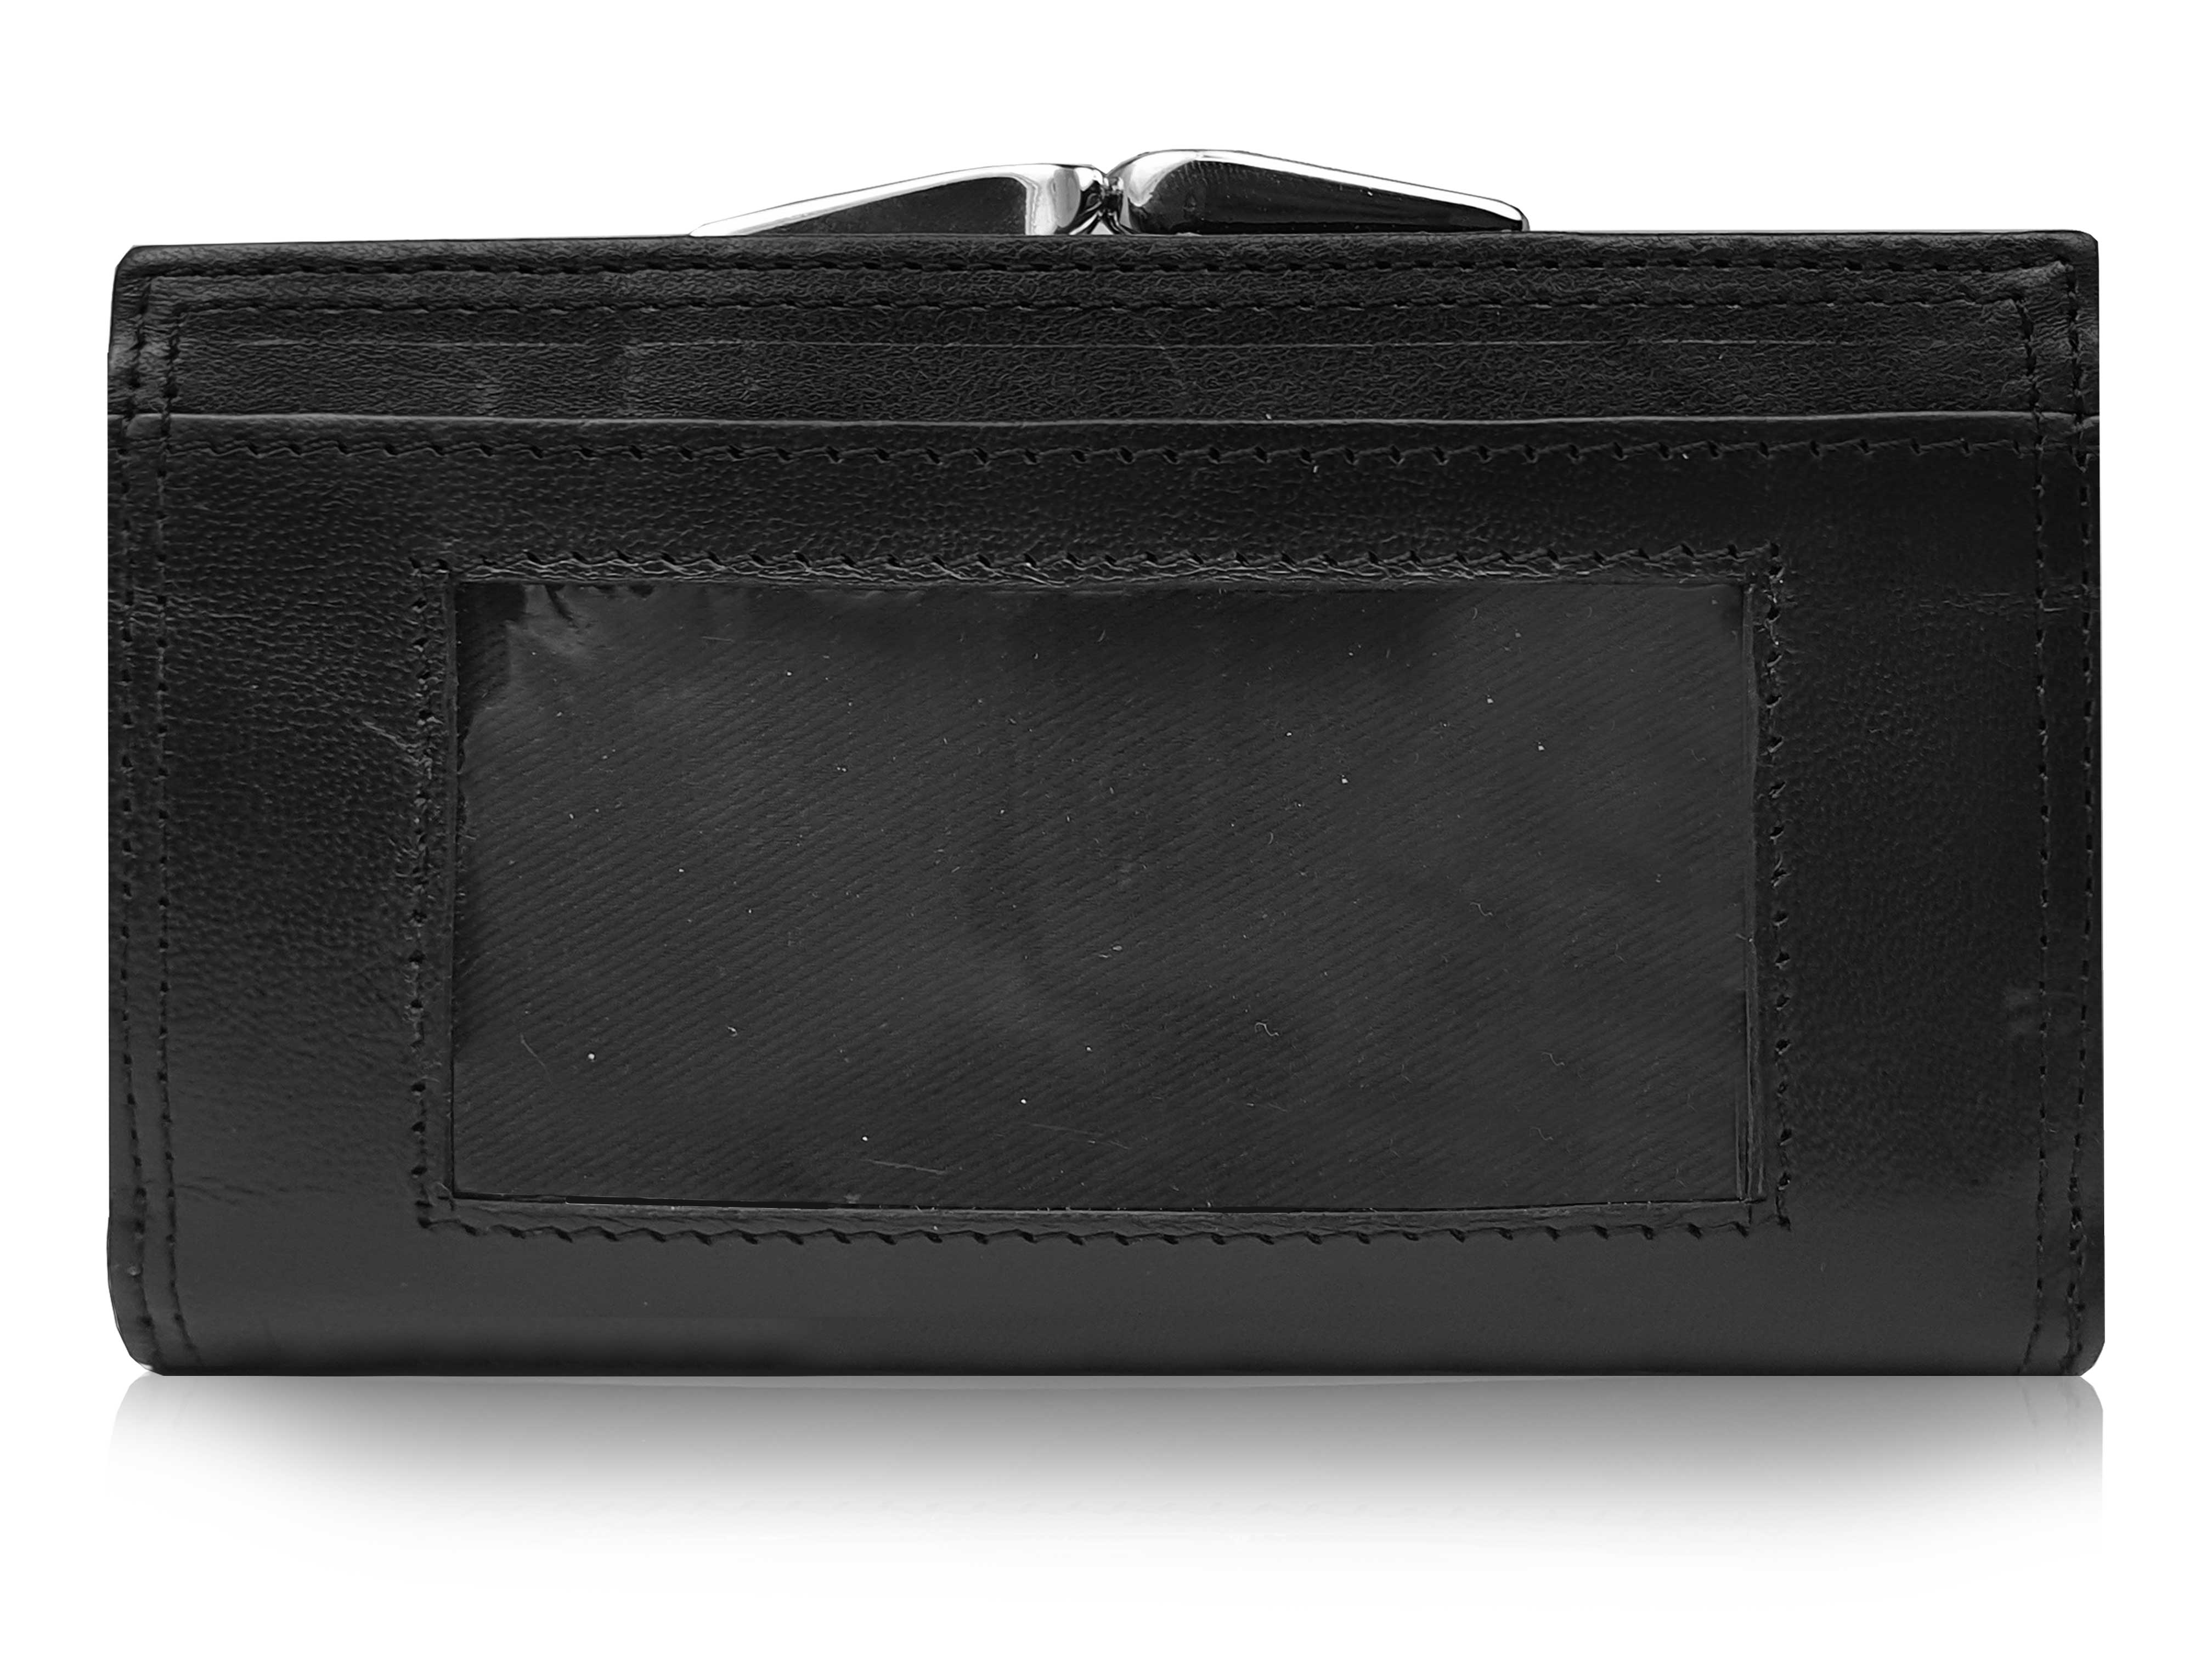 Buy Original Levis Leather Men's Bi fold Money Bag purse Wallet Purse for  Men Gents with credit Card and Coin Slots at Amazon.in